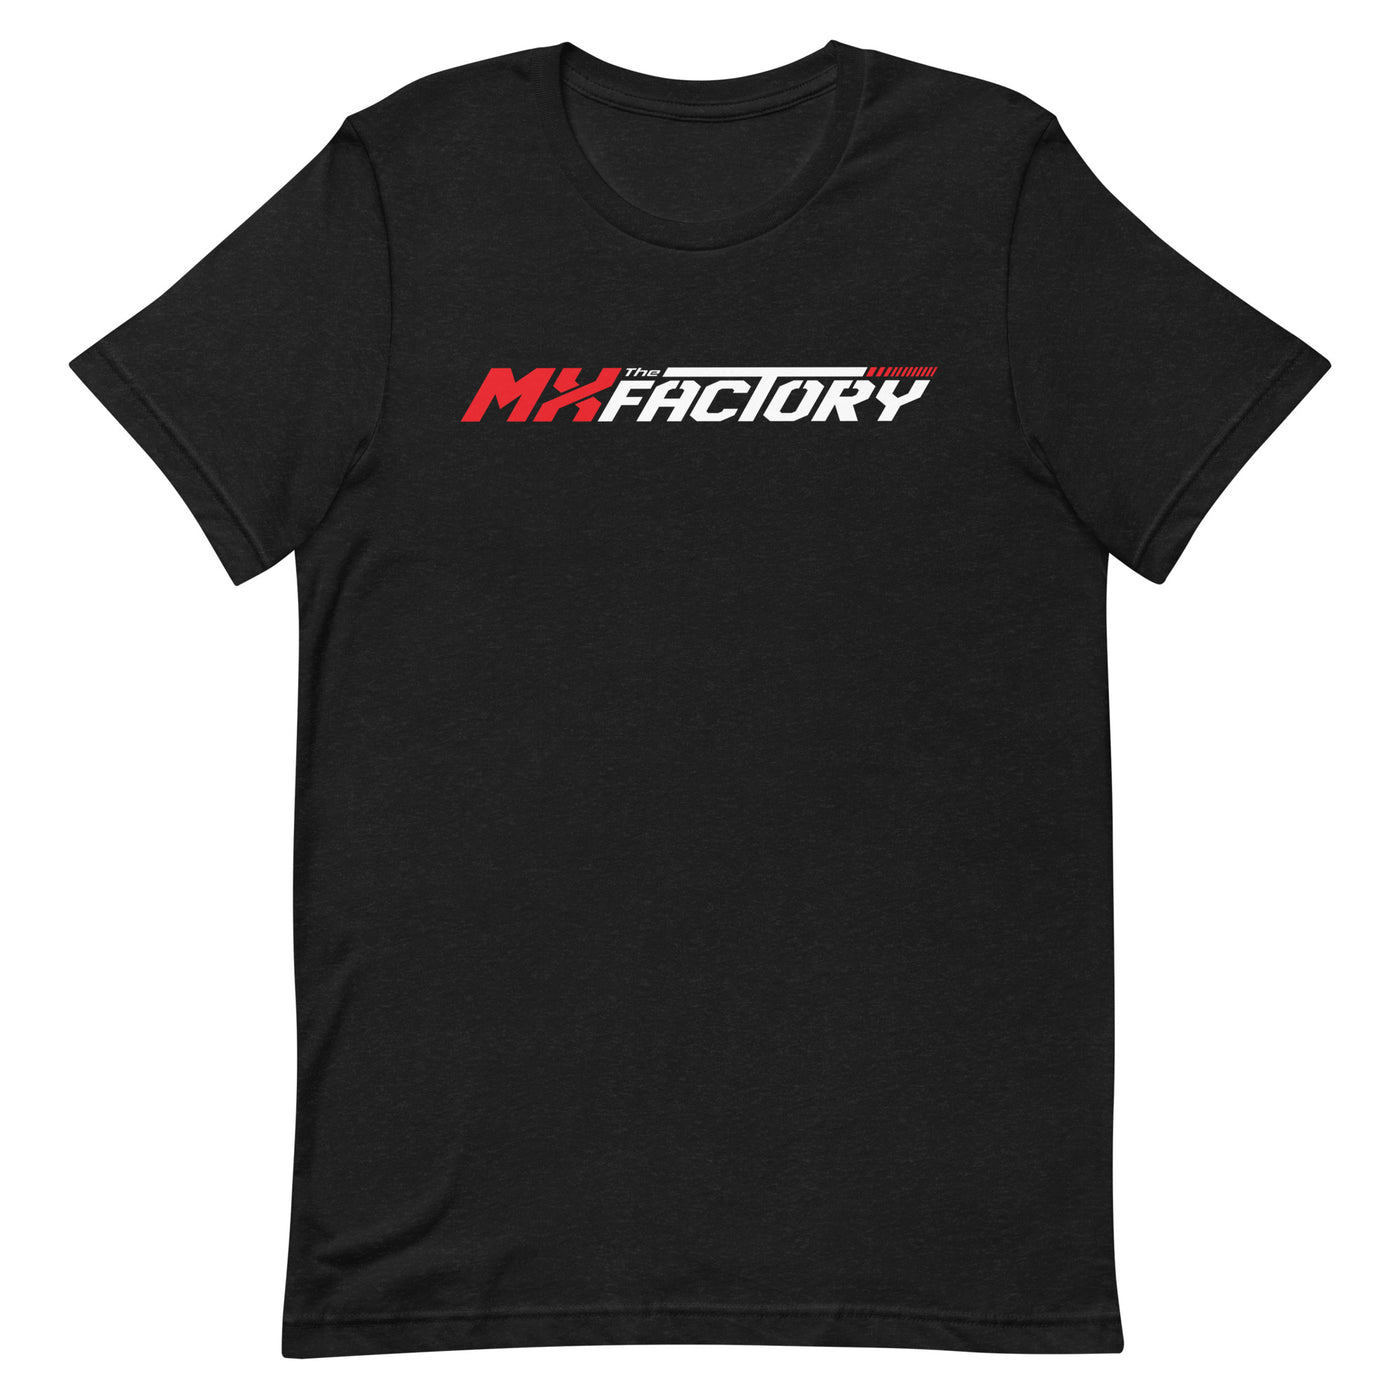 The MX Factory Classic Tee